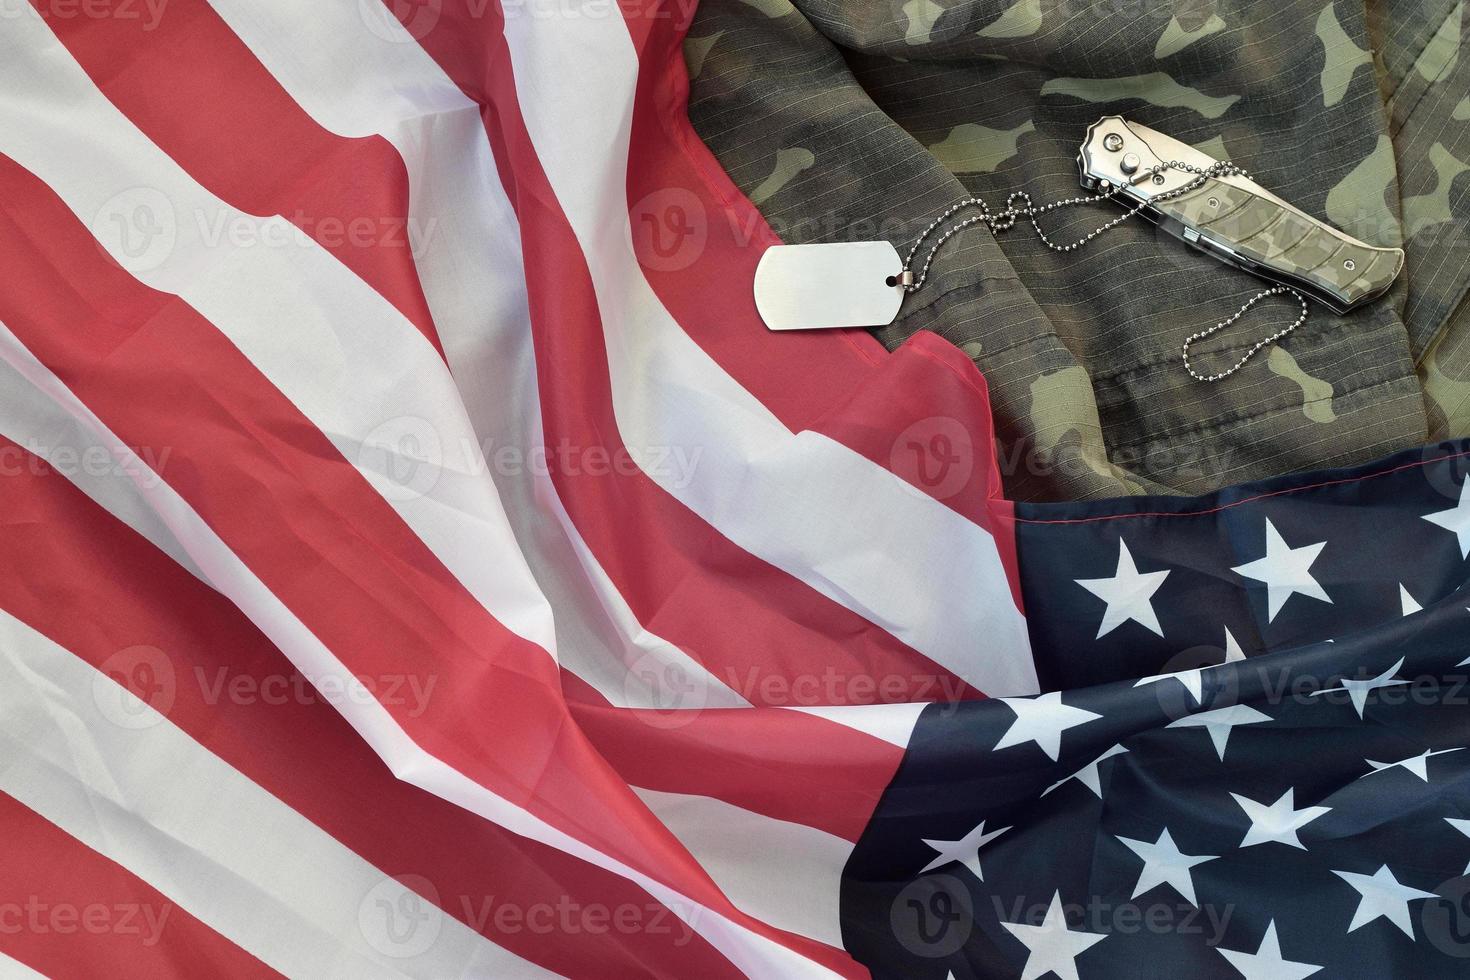 Army dog tag token and knife lies on Old Camouflage uniform and folded United States Flag photo